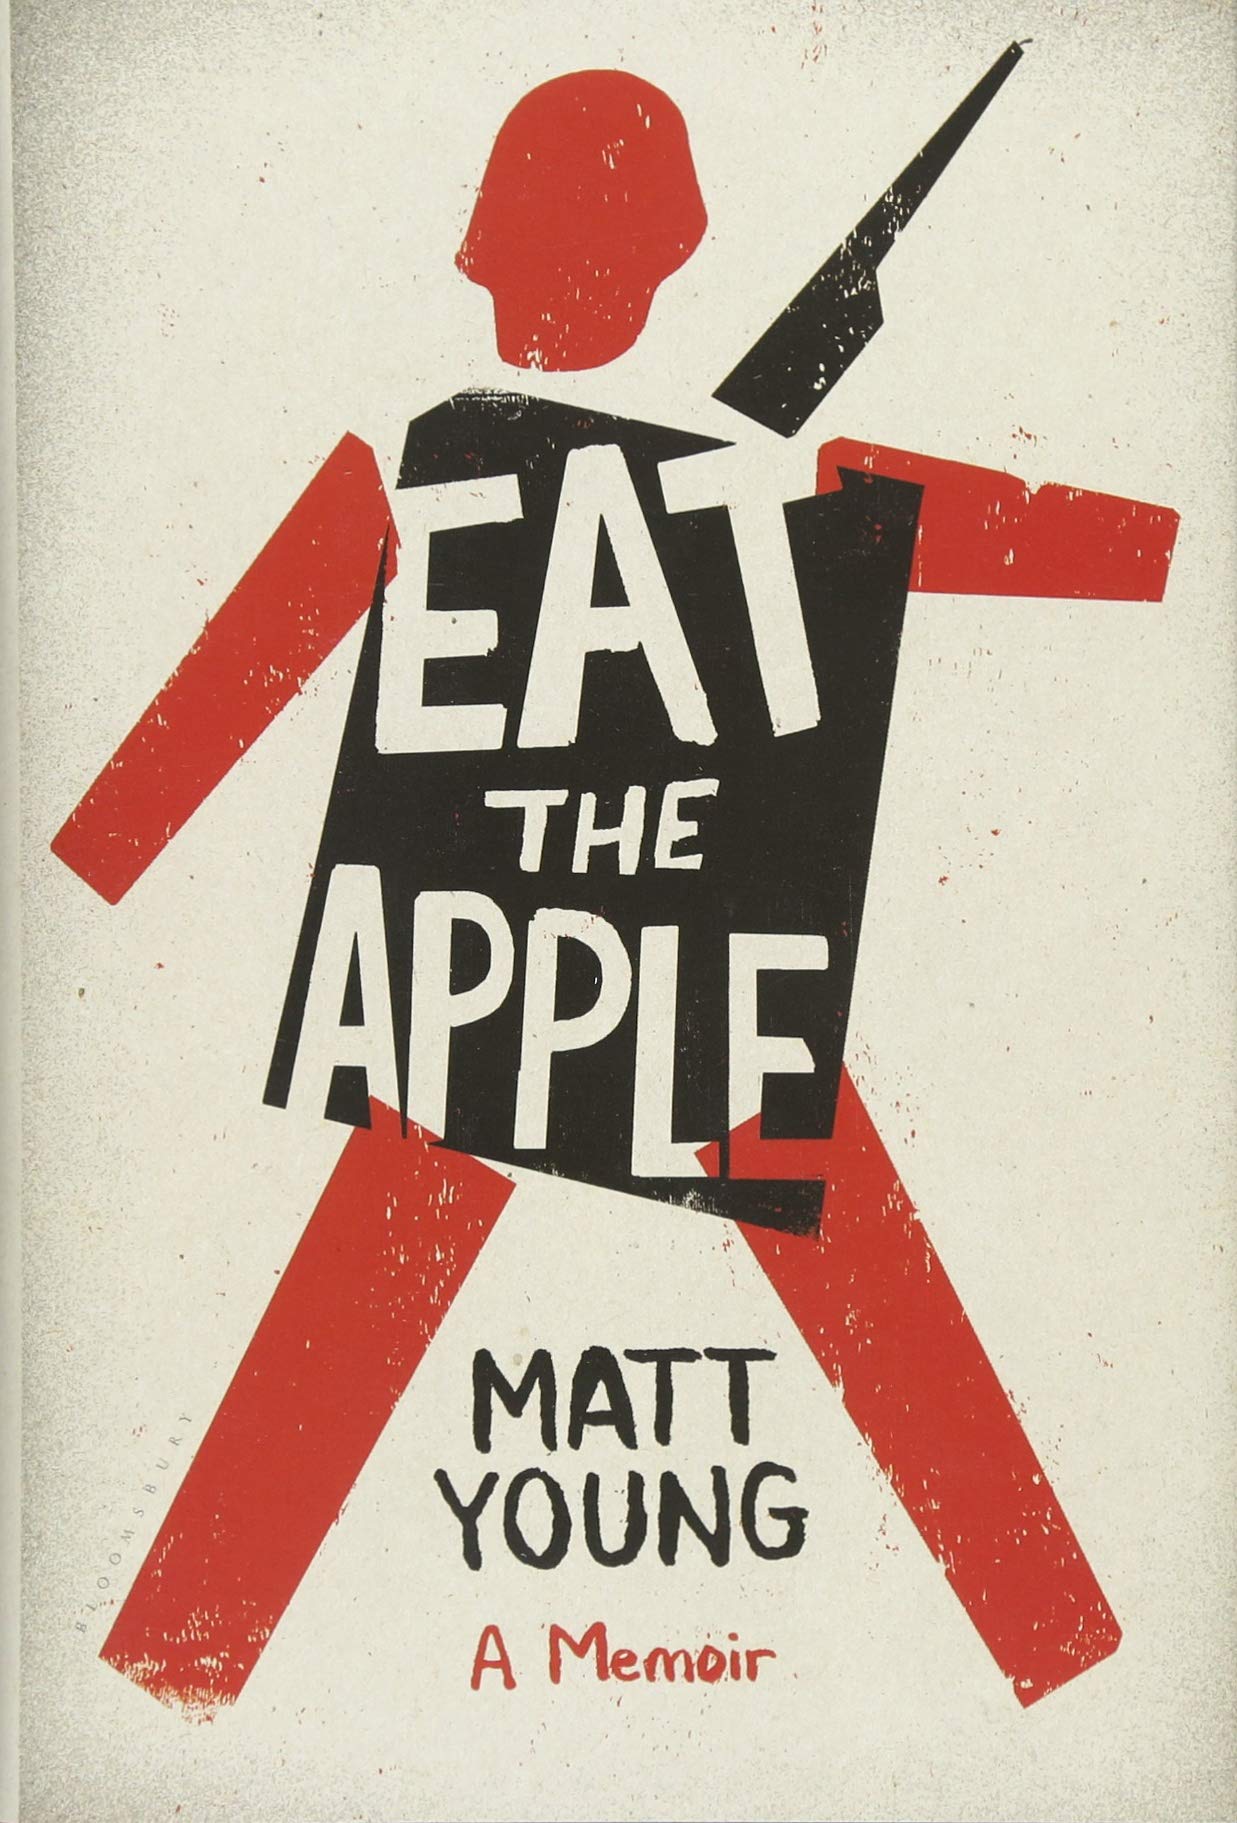 'Eat the Apple' by Matt Young